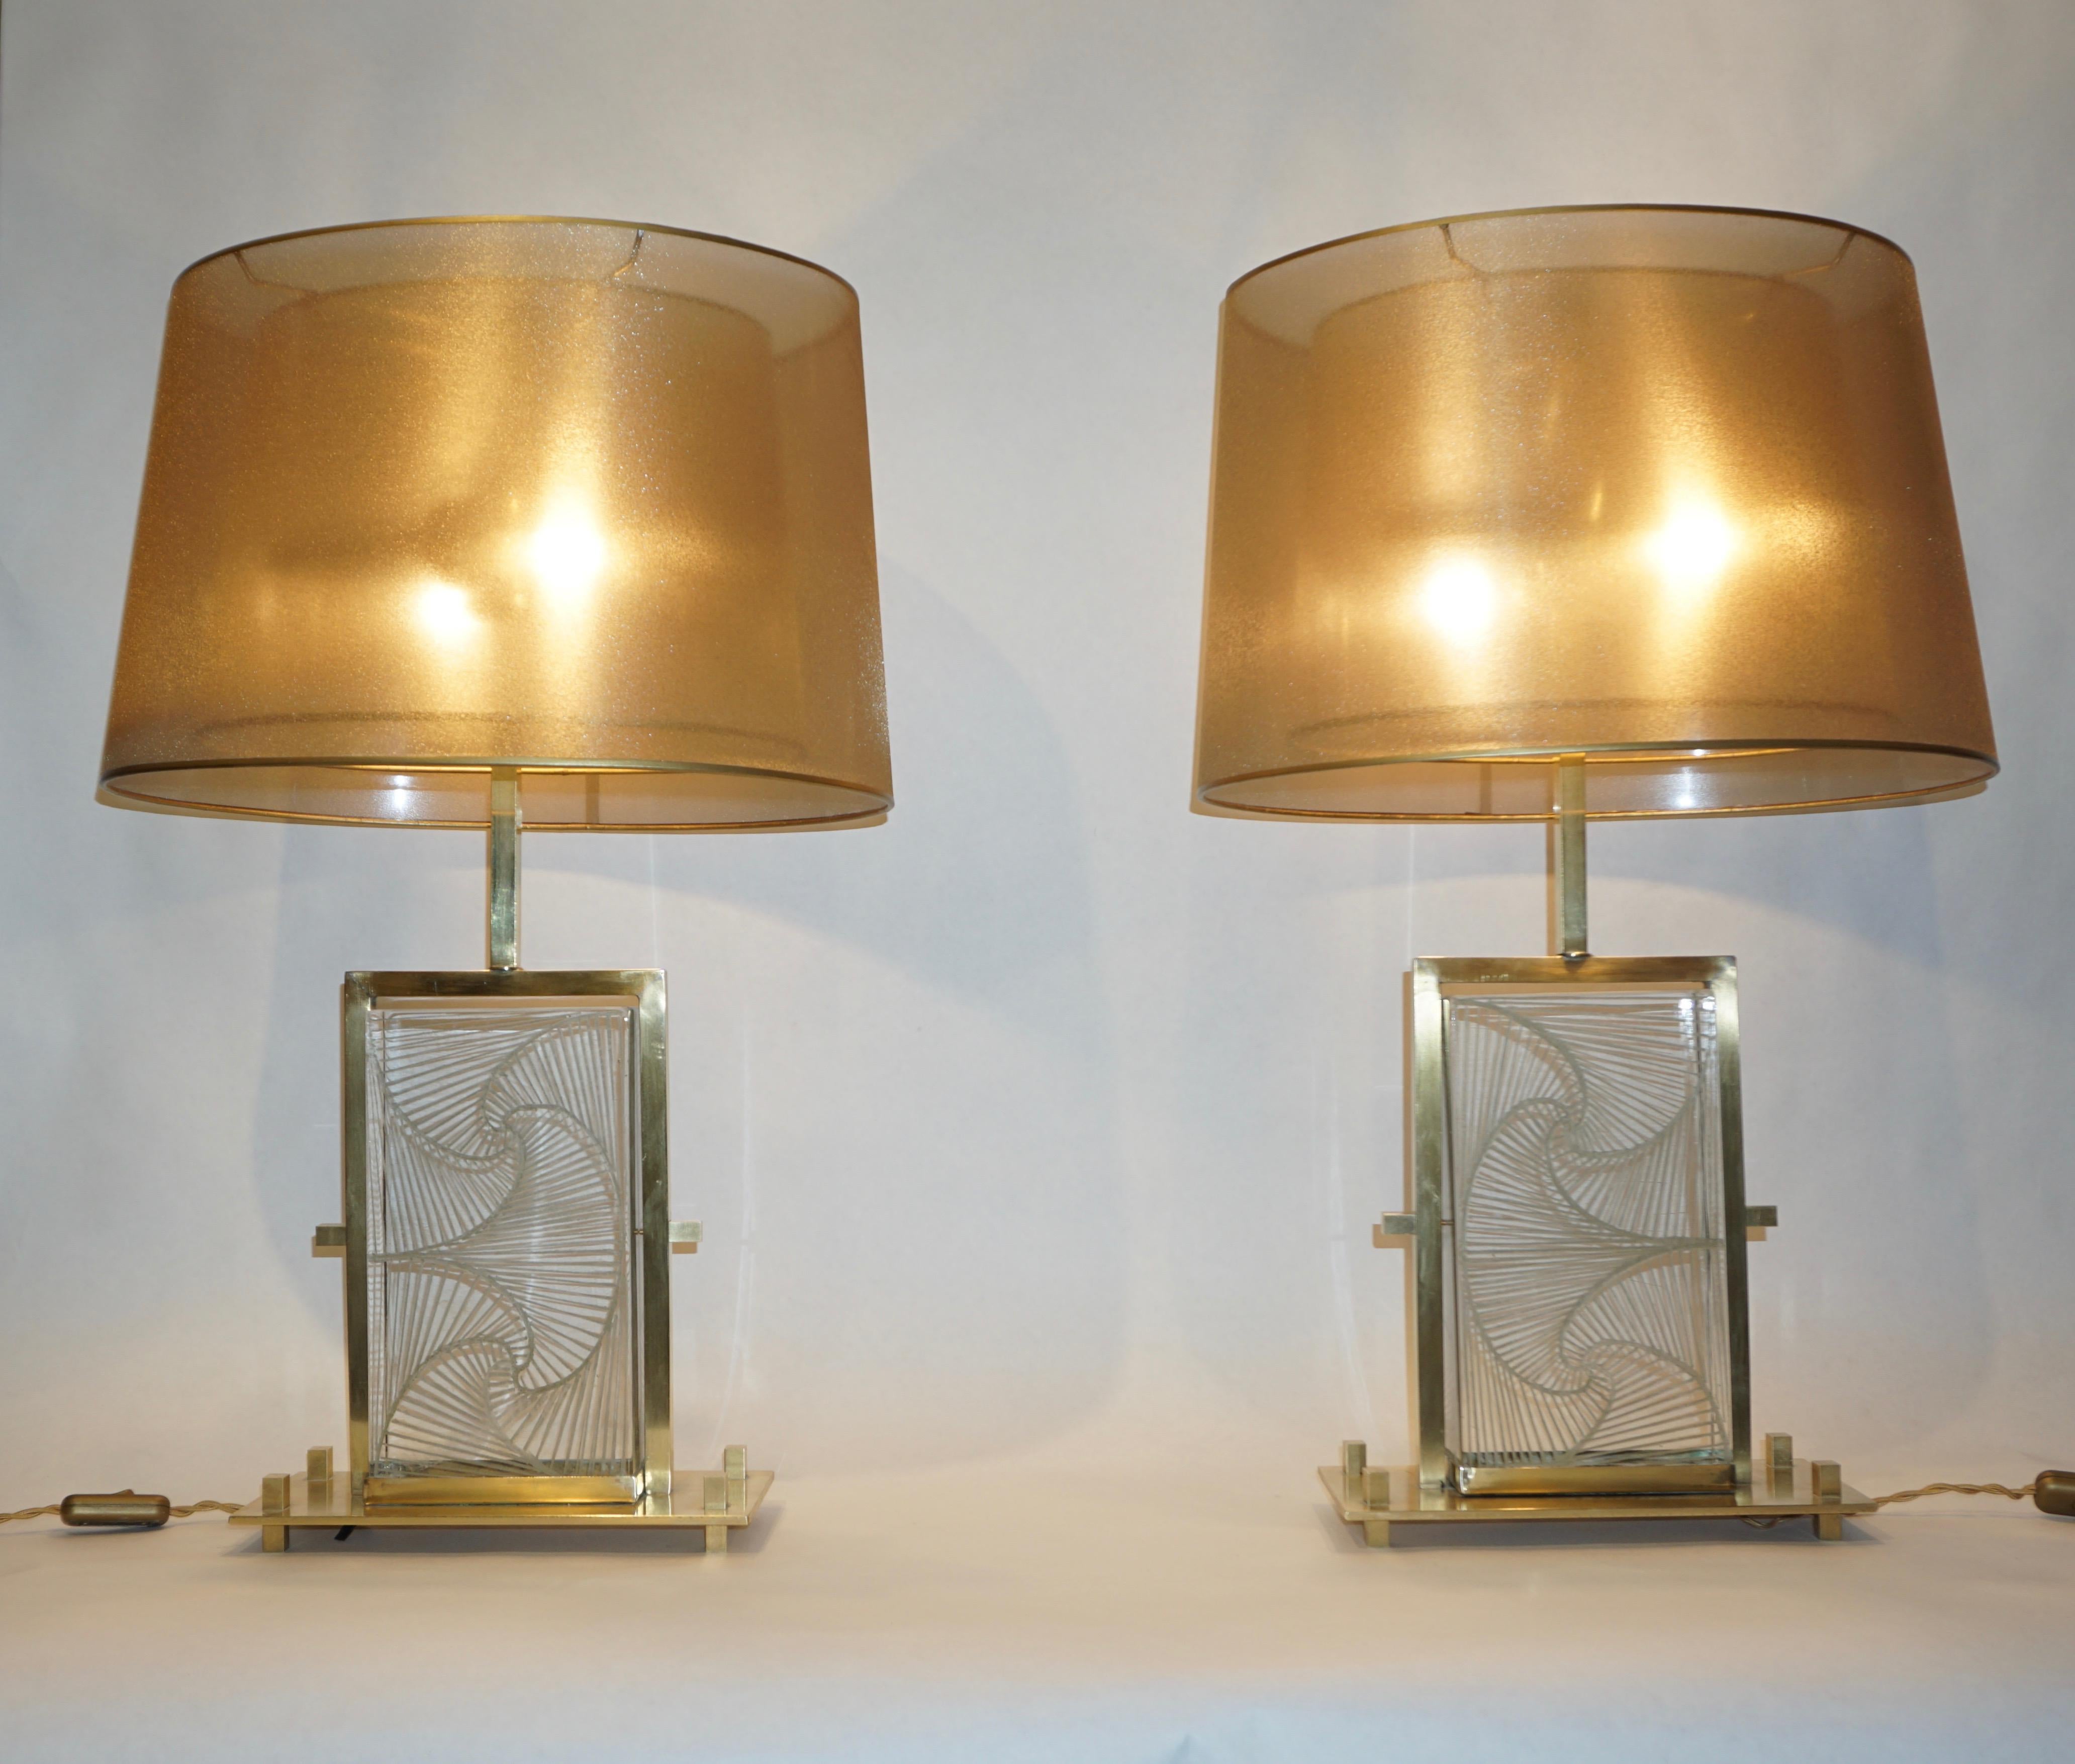 1990s pair of architectural table lamps, entirely handcrafted. The geometric body composed of a thick rock crystal Murano glass block is engraved with floral calla lily motif with gold reflections, floating in a slim urban design brass structure and